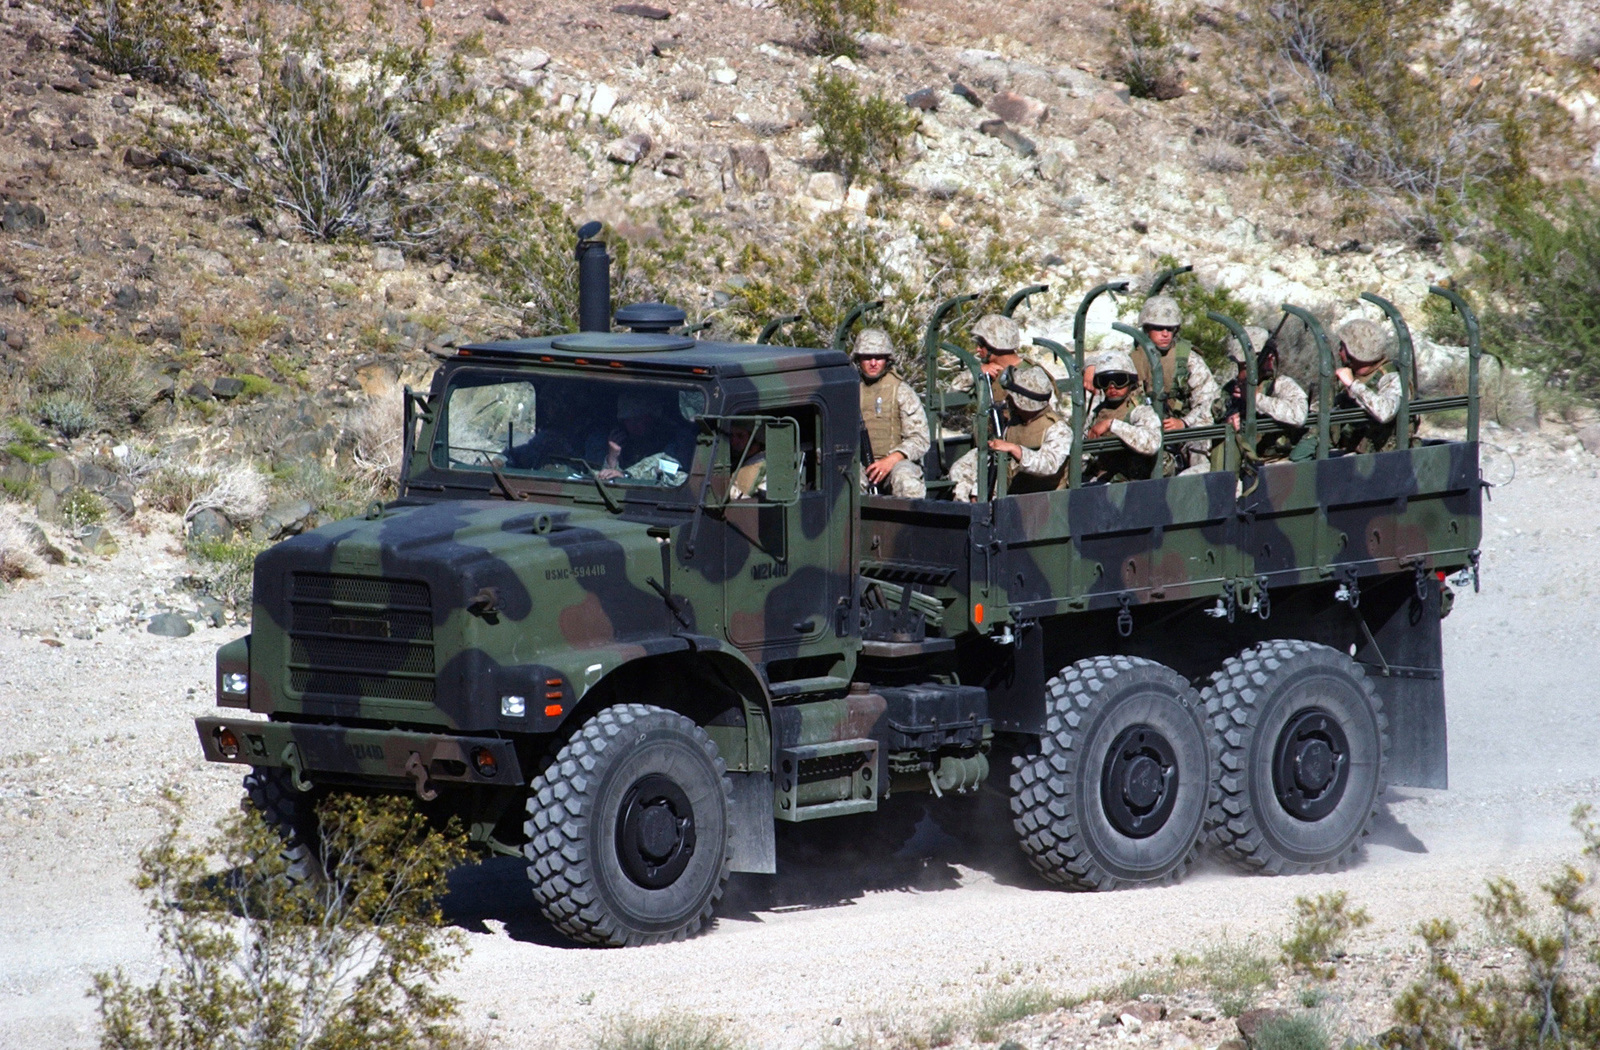 A US Marine Corps (USMC) Bravo Company Co.), 1ST Tanks, MK-23 Medium Tactical Vehicle Replacement (MTVR) 7-ton cargo truck, being used as a carrier, passes slowly through a simulated village